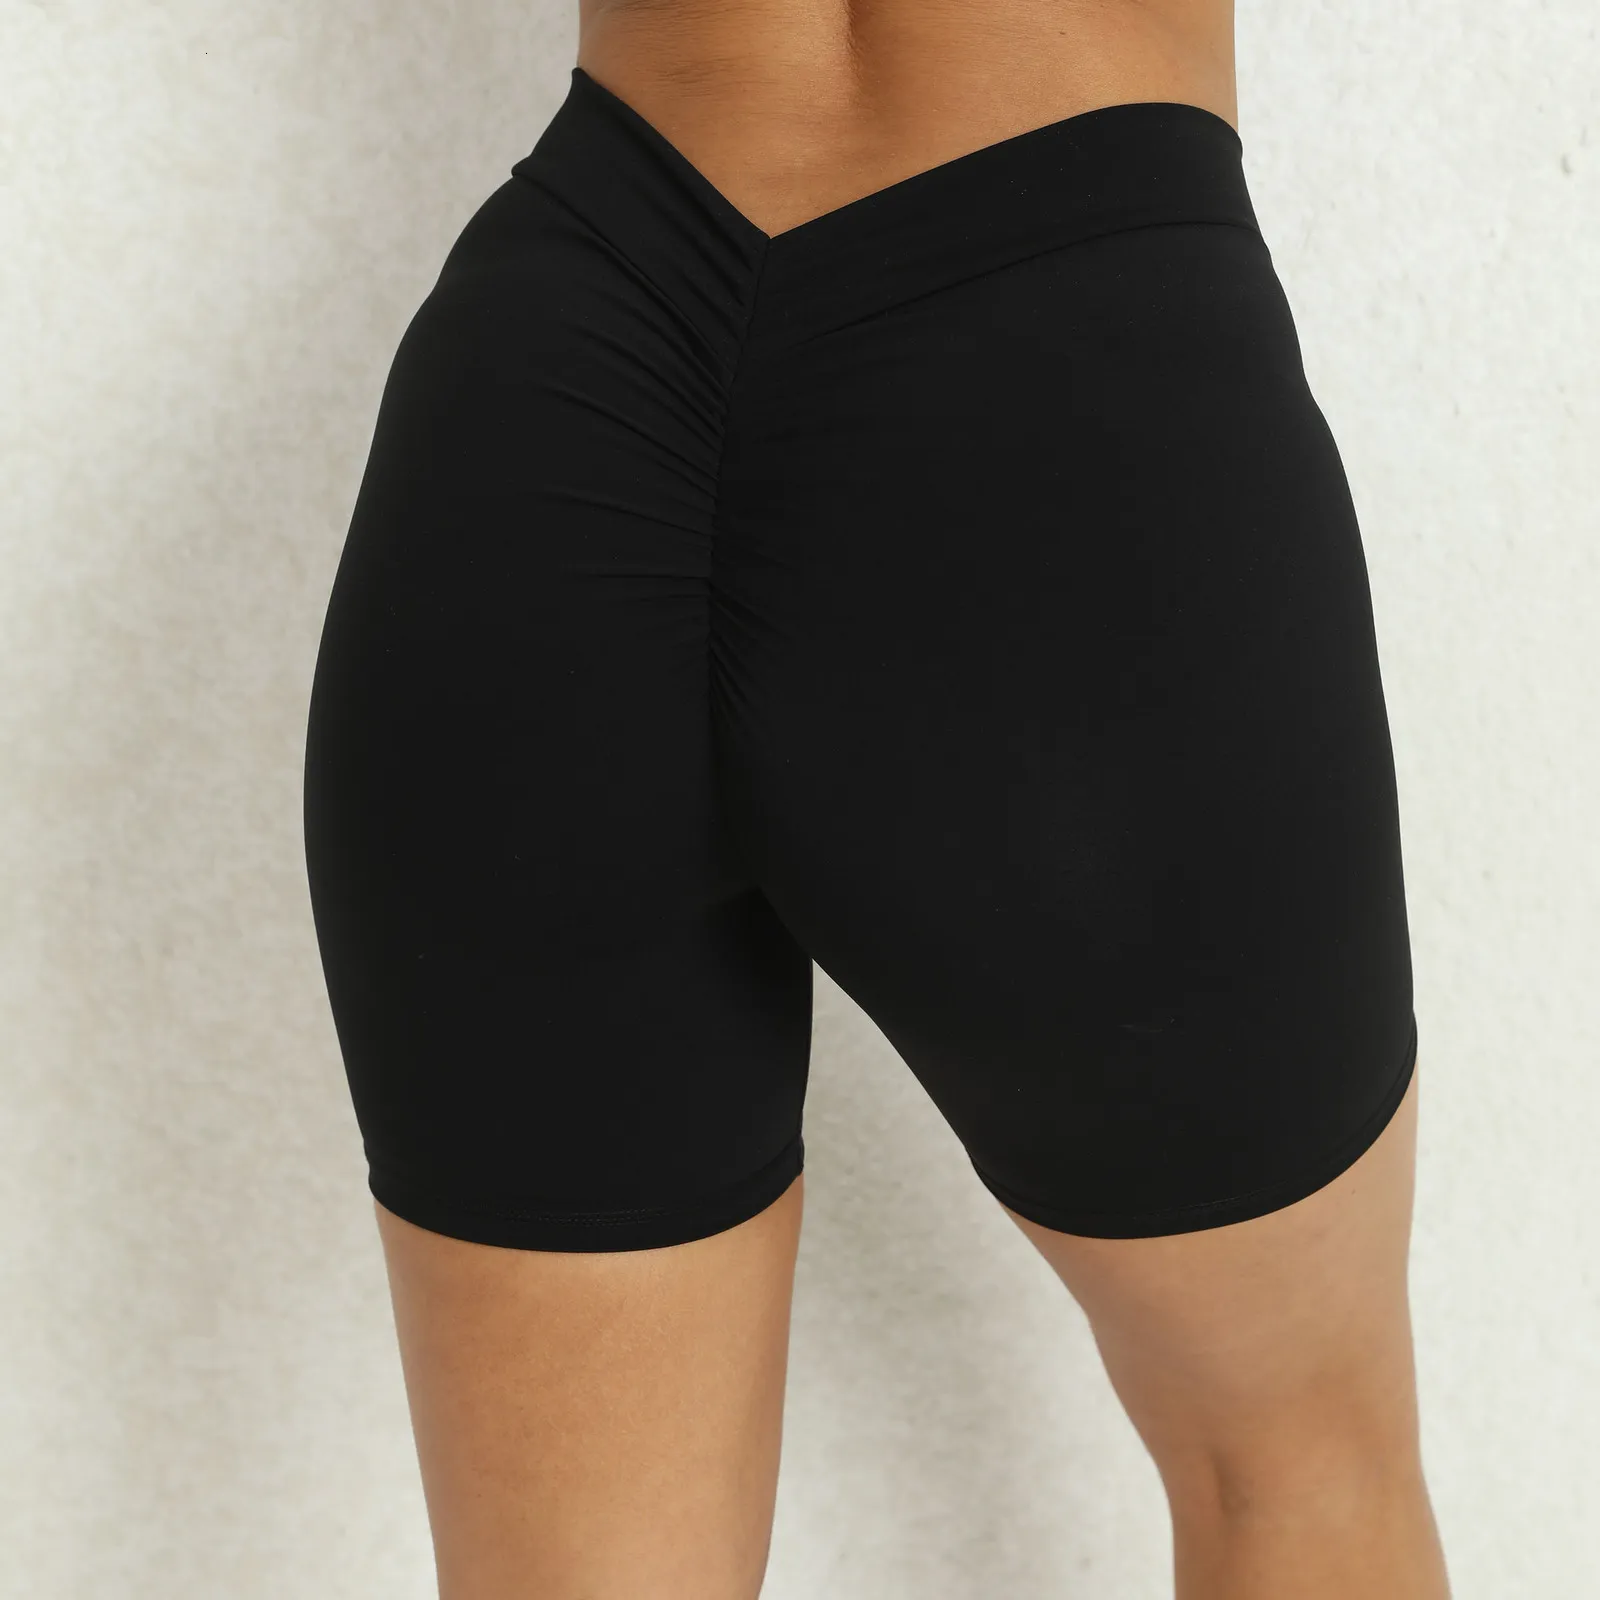 NORMOV V Back Waist Bubblelime Yoga Pants  High Waisted Booty  Leggings For Womens Gym, Sports, And Fitness Push Up And Scrunch Design  Style 230803 From Bai07, $12.35